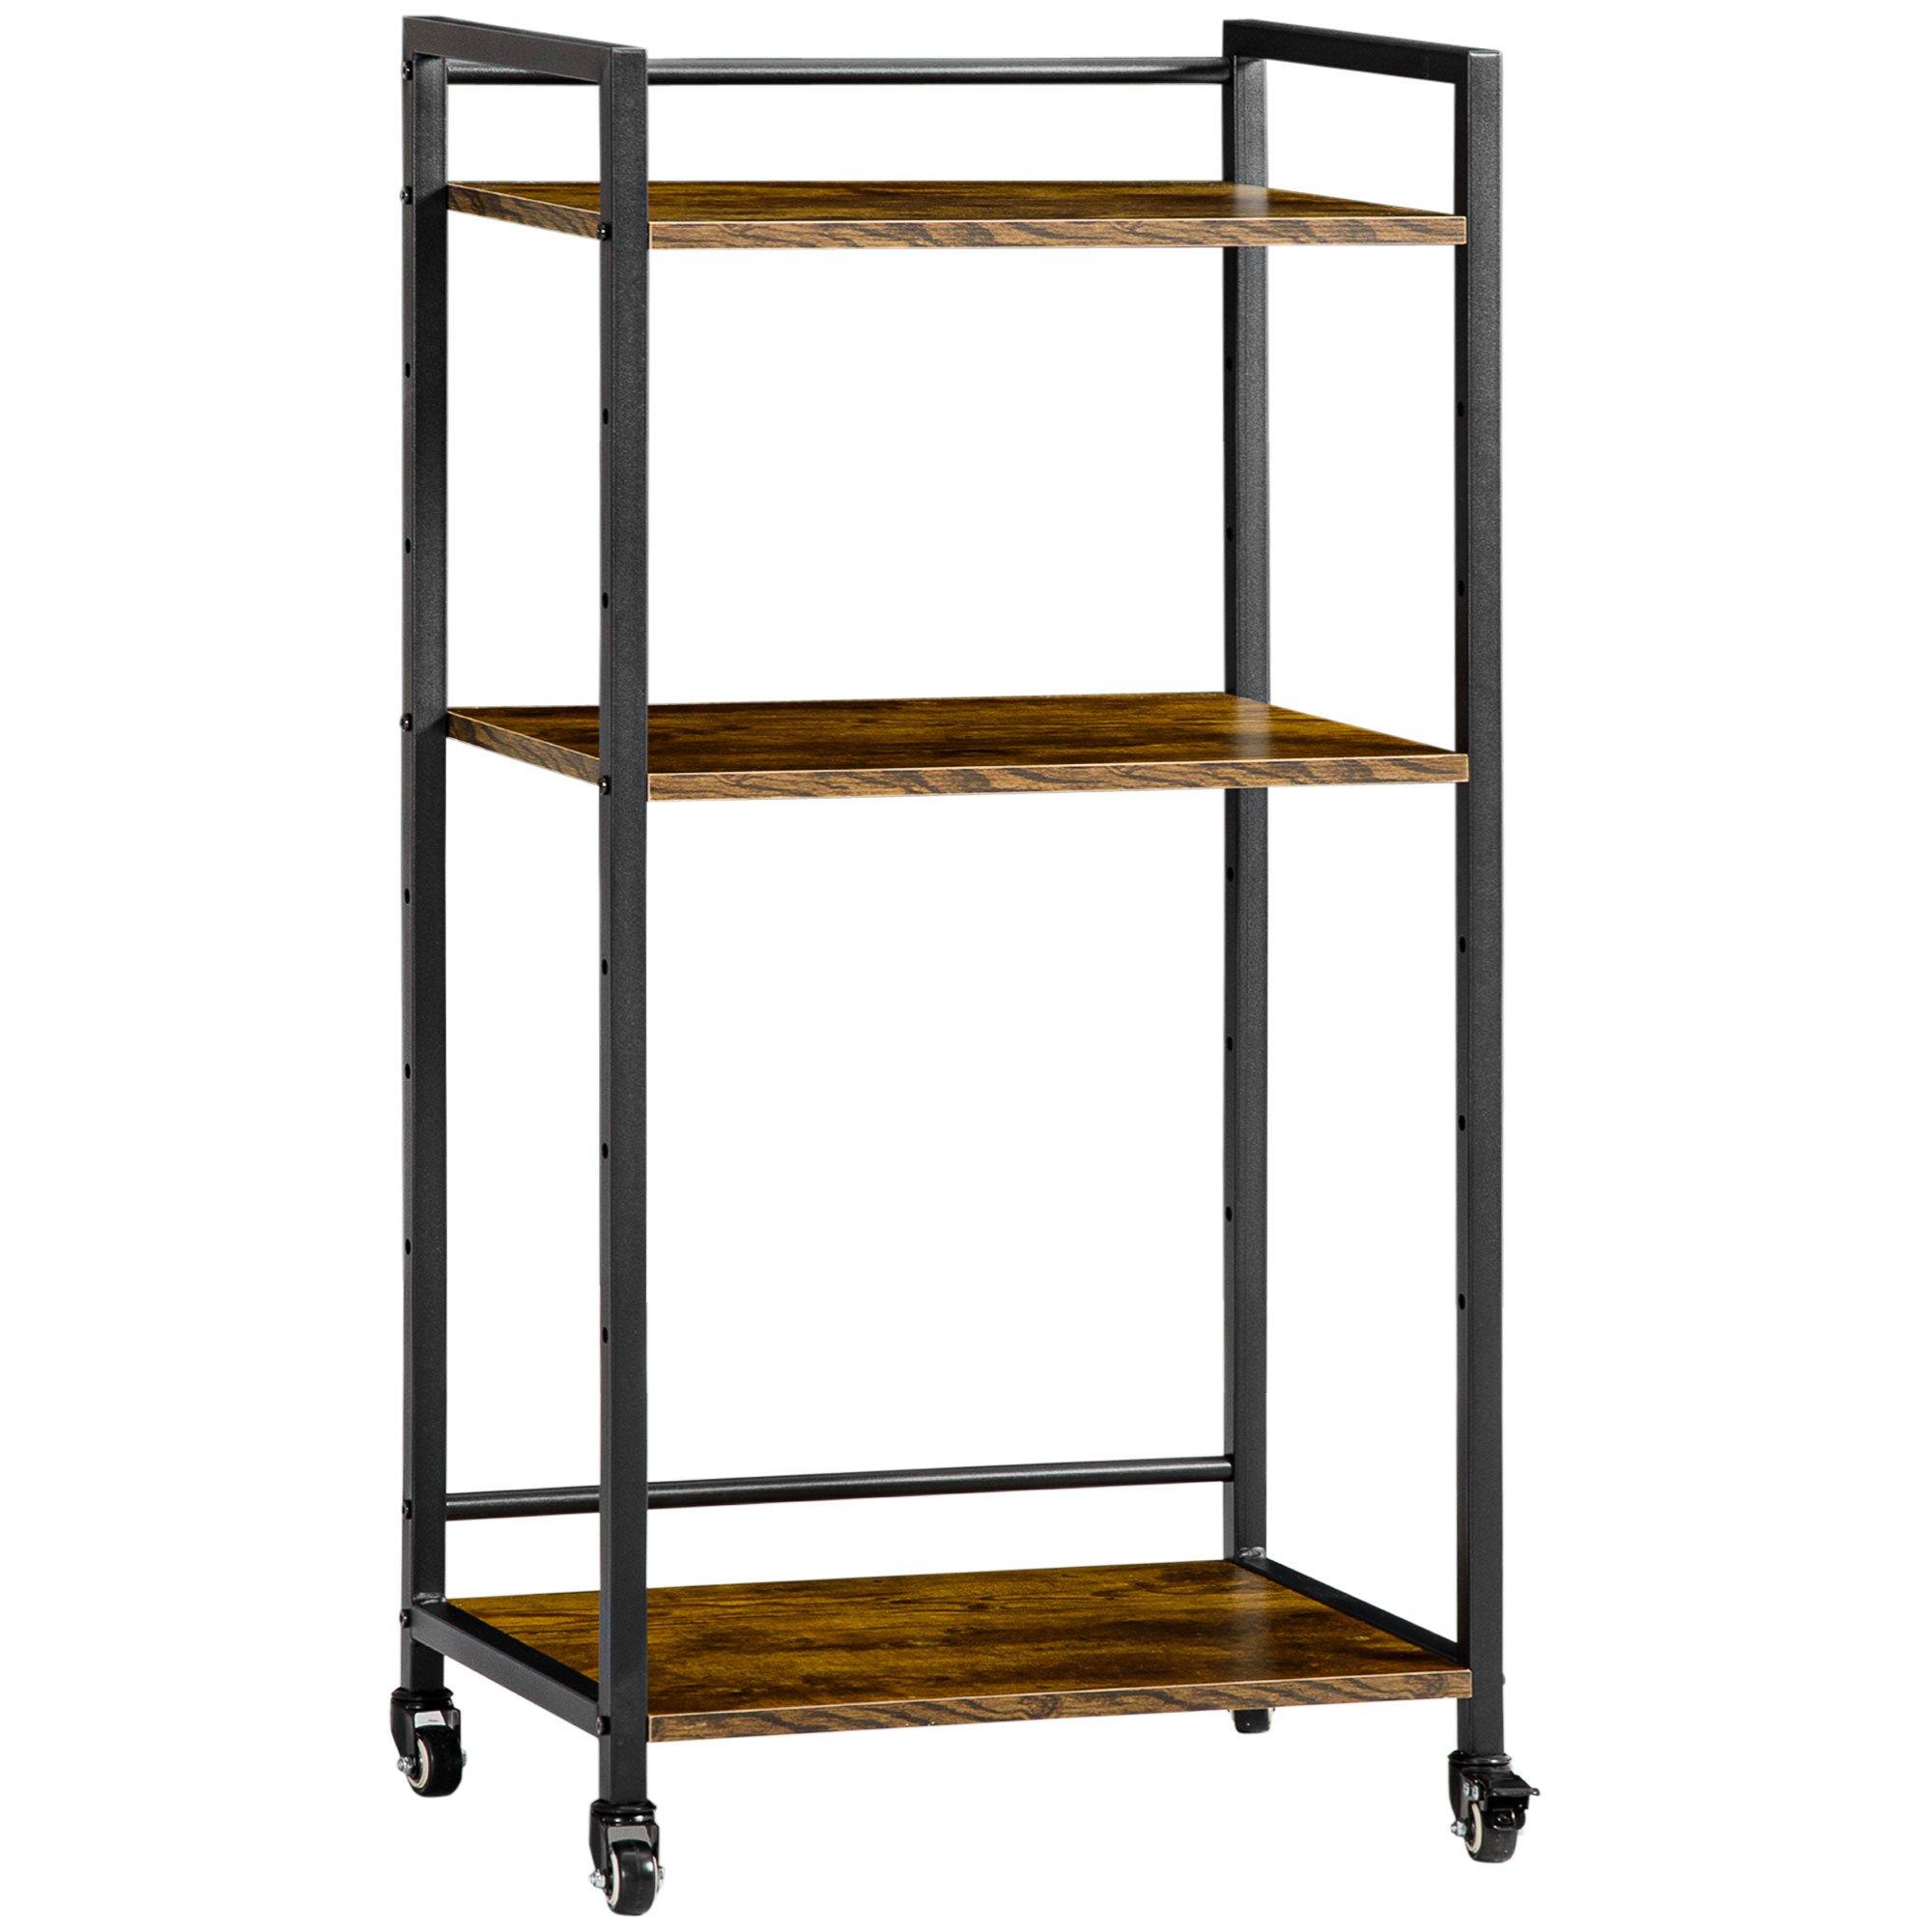 3-Tier Printer Stand Rolling Trolley with Adjustable Shelves